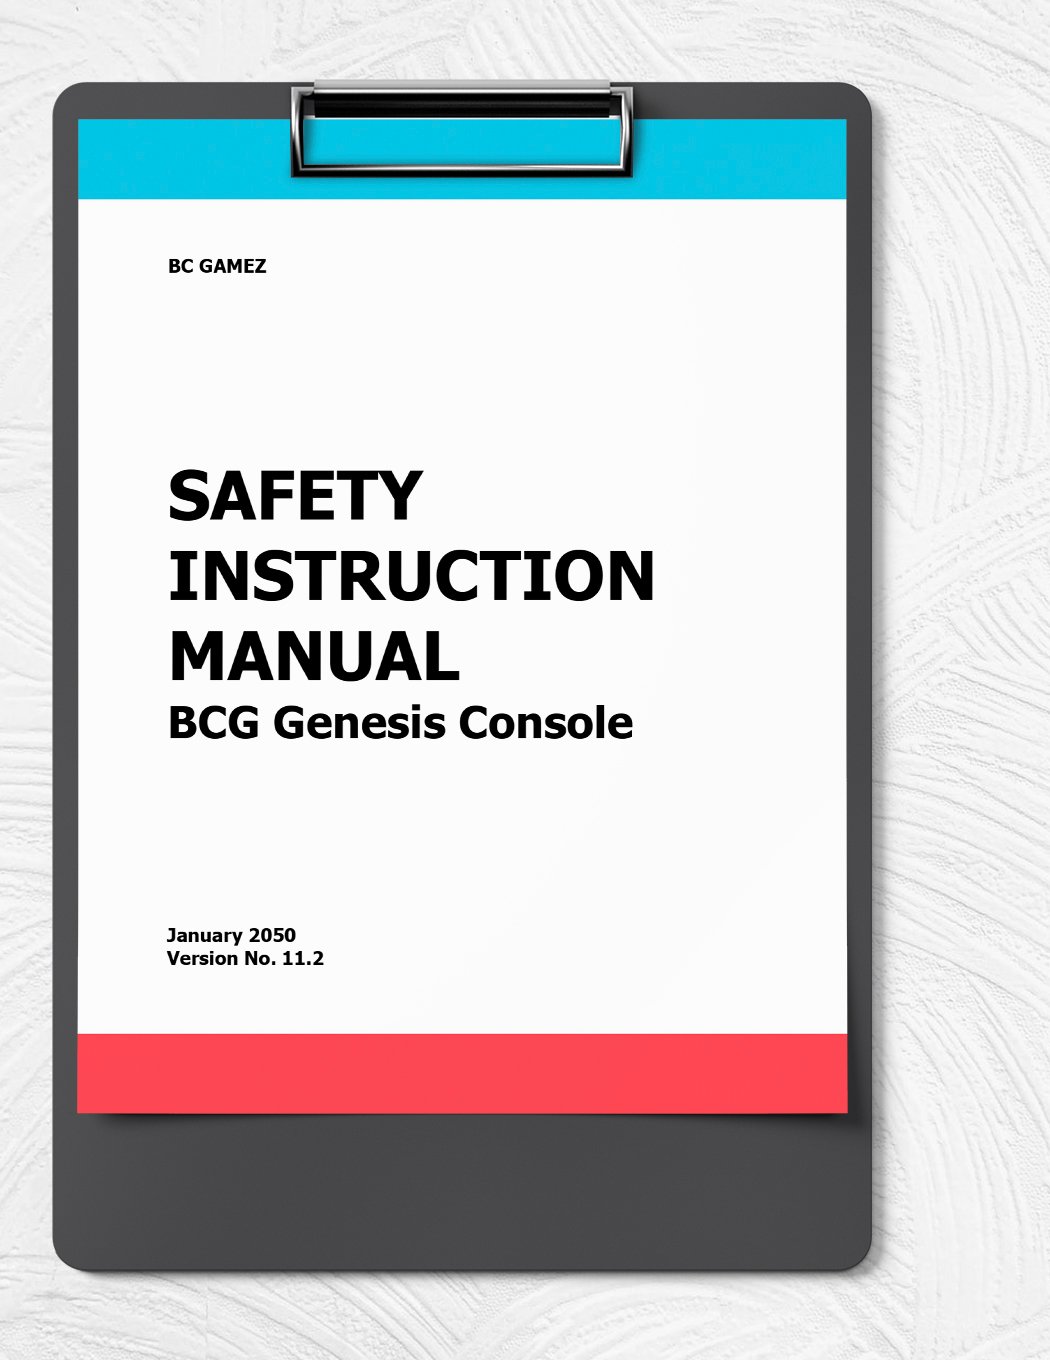 Safety Instruction Manual Template